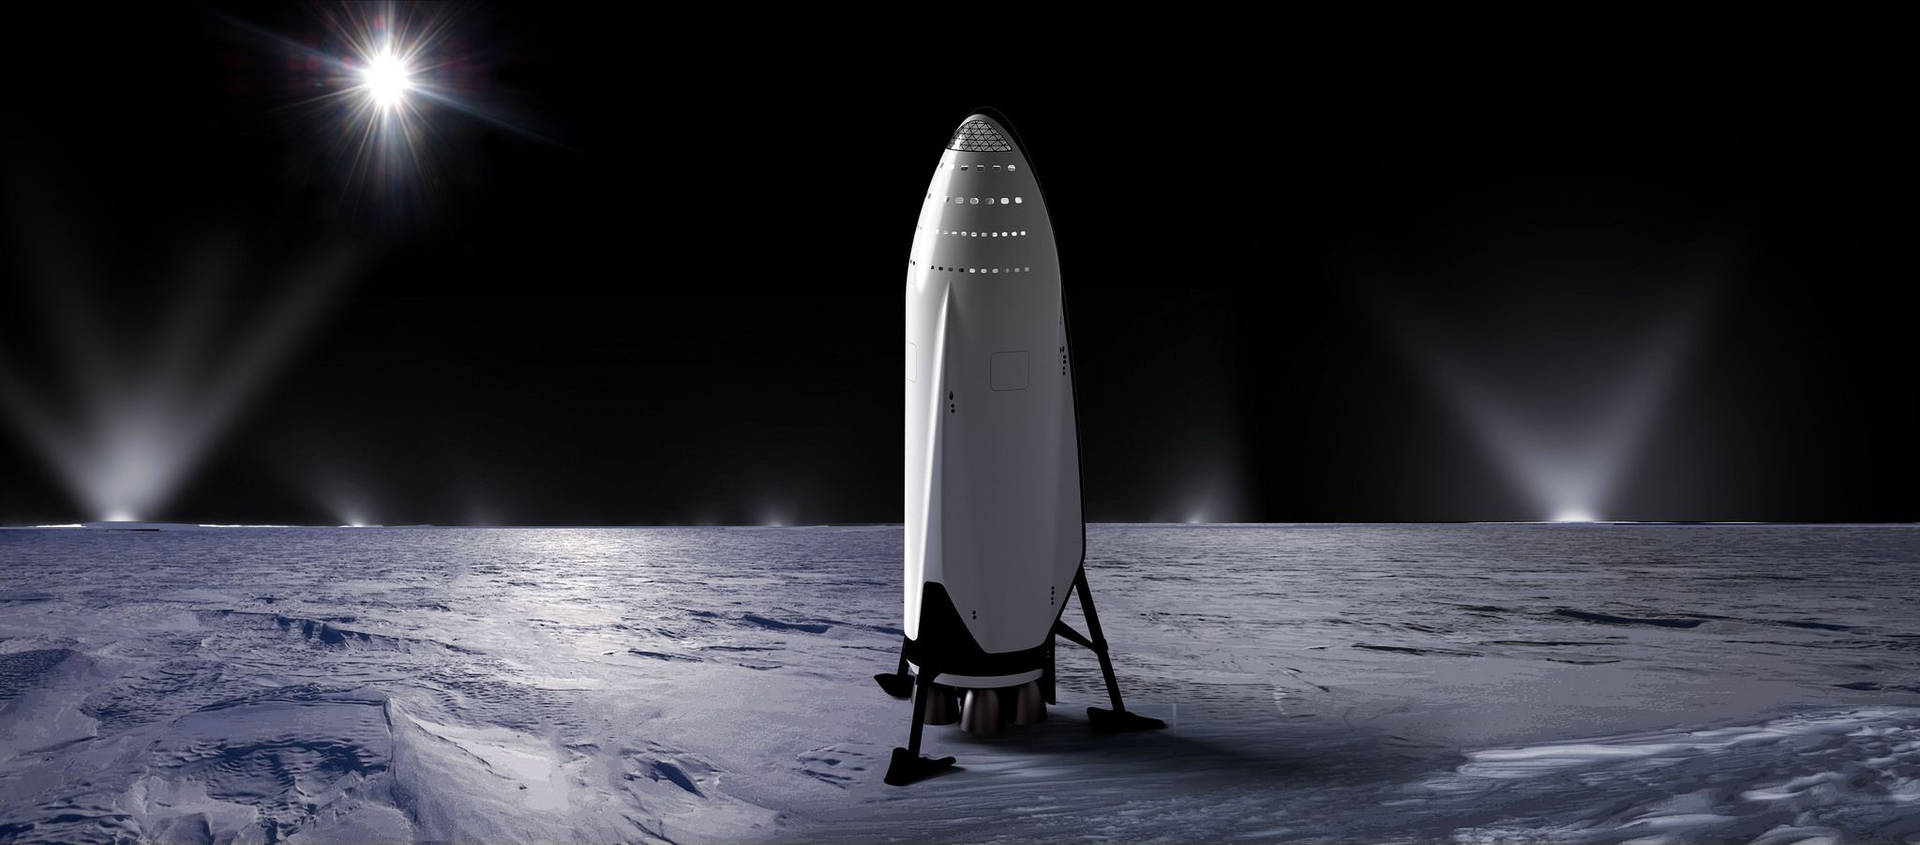 Spacex Interplanetary Transport System Background